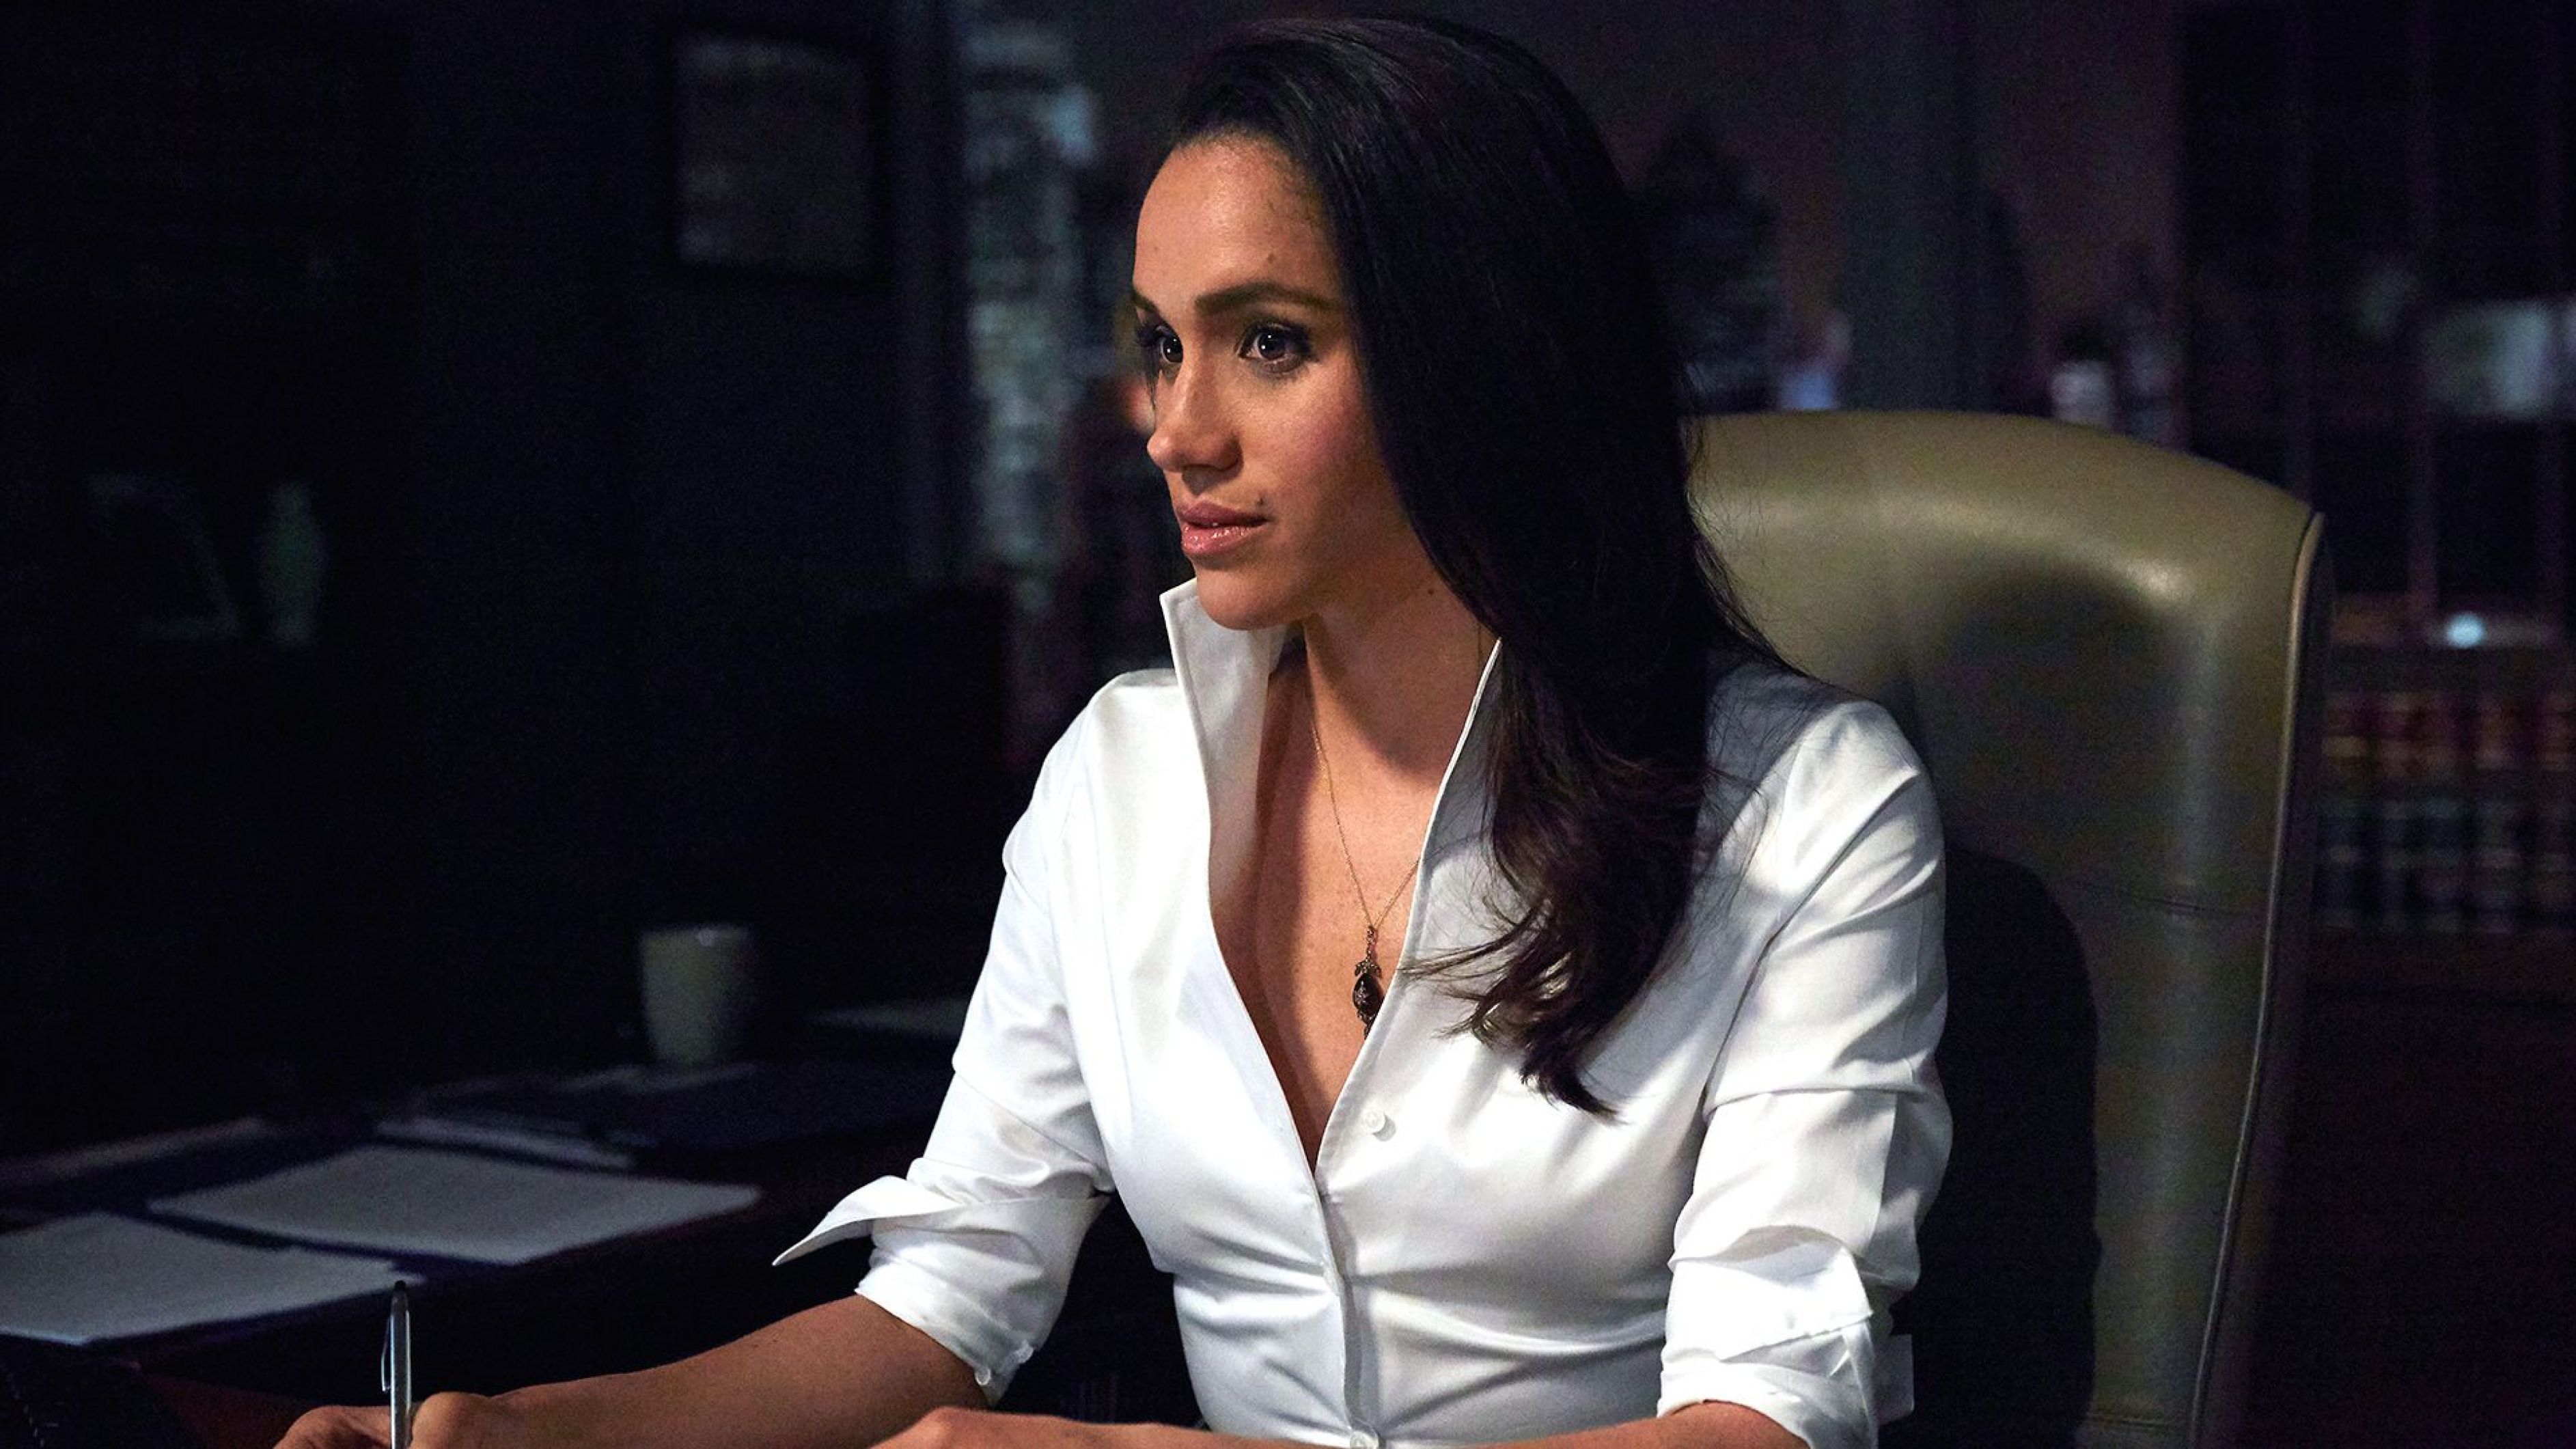 Suits helped Markle rise to fame until she left acting behind to marry Prince Harry in 2018